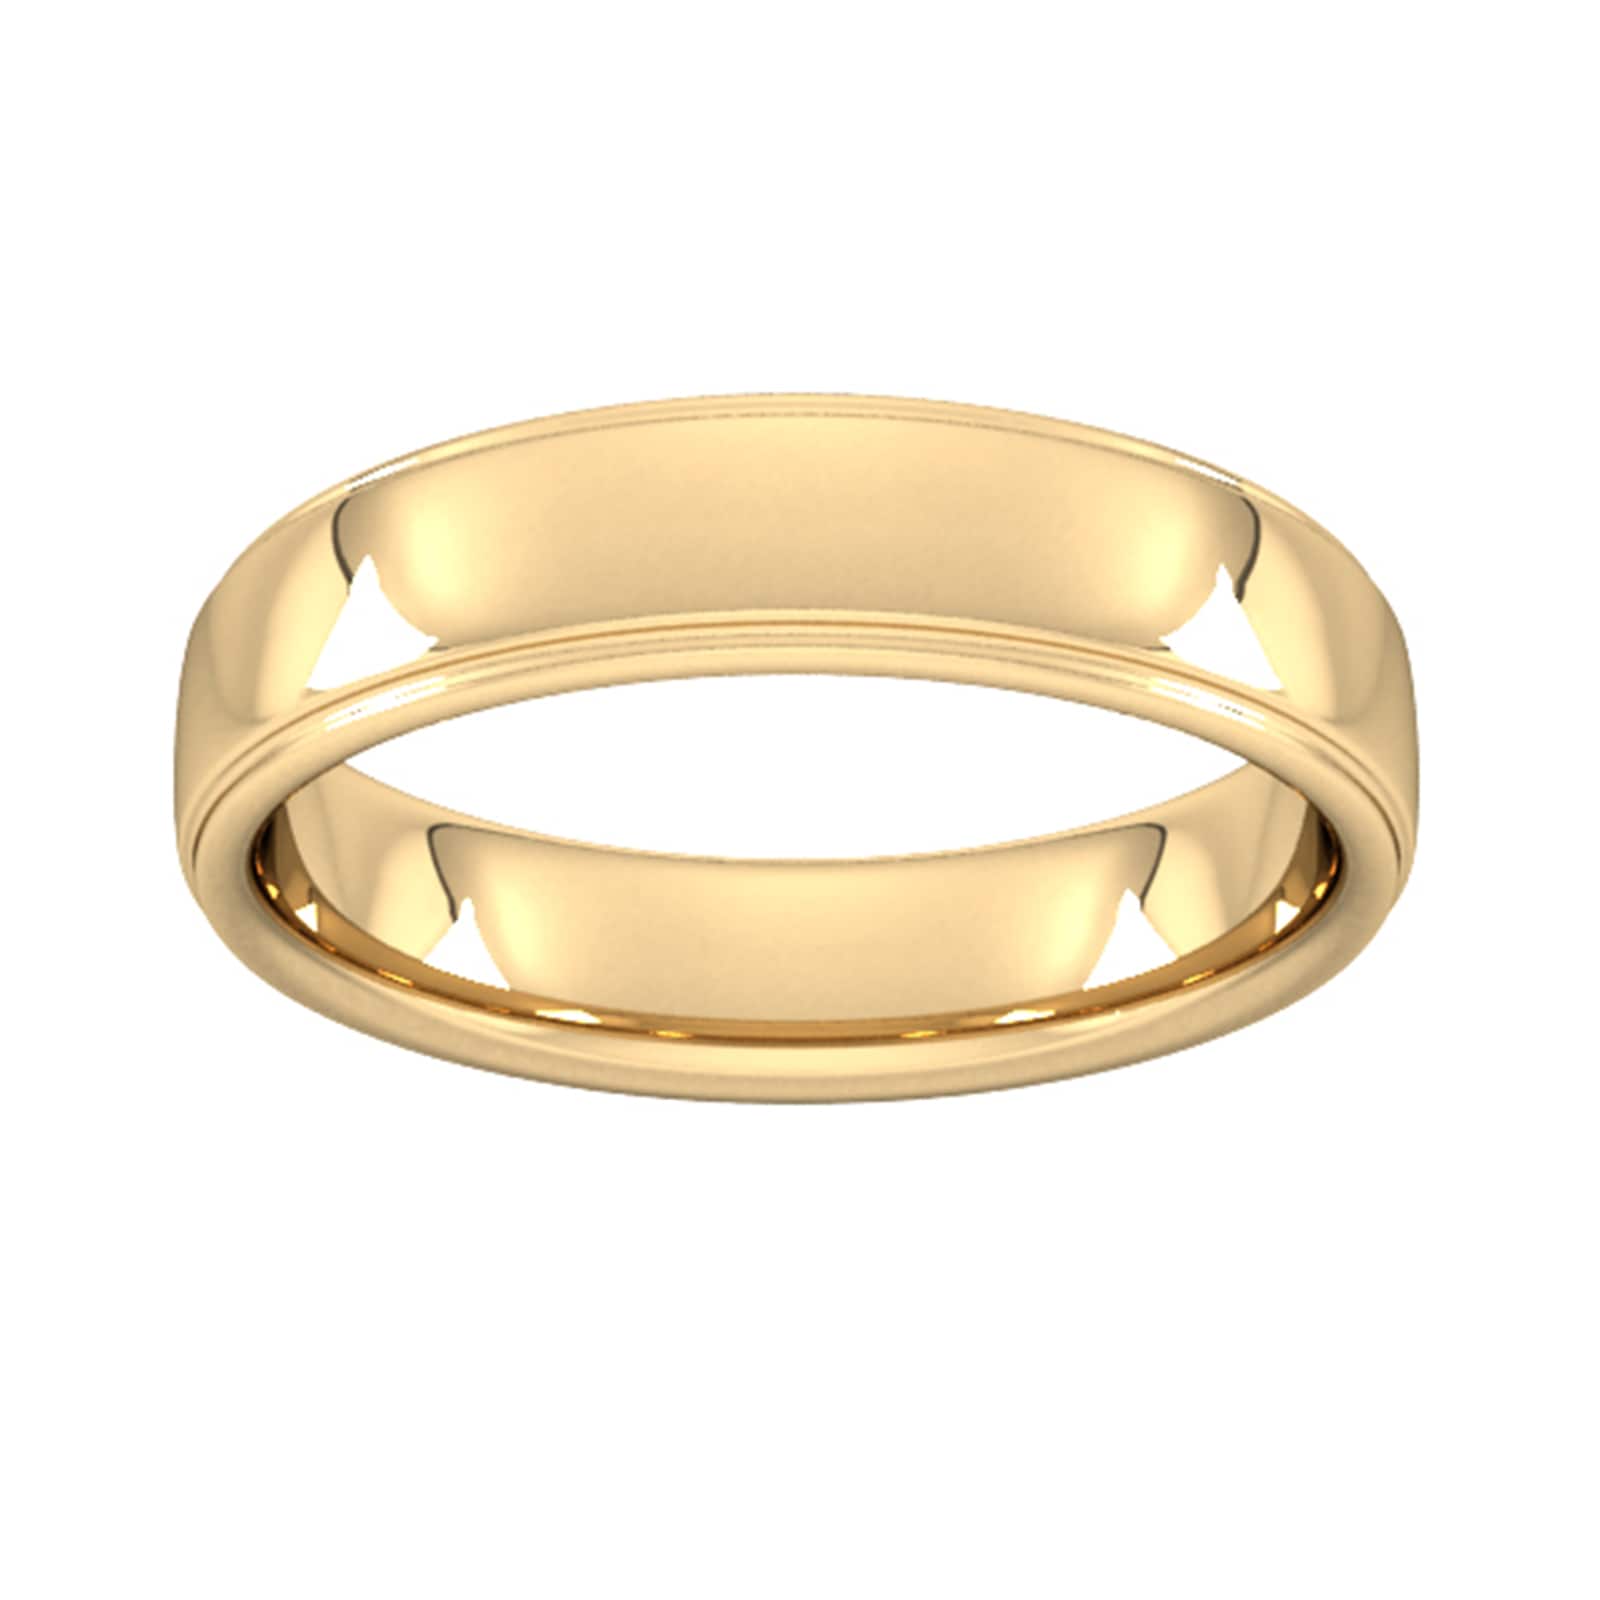 5mm Slight Court Heavy Polished Finish With Grooves Wedding Ring In 9 Carat Yellow Gold - Ring Size P